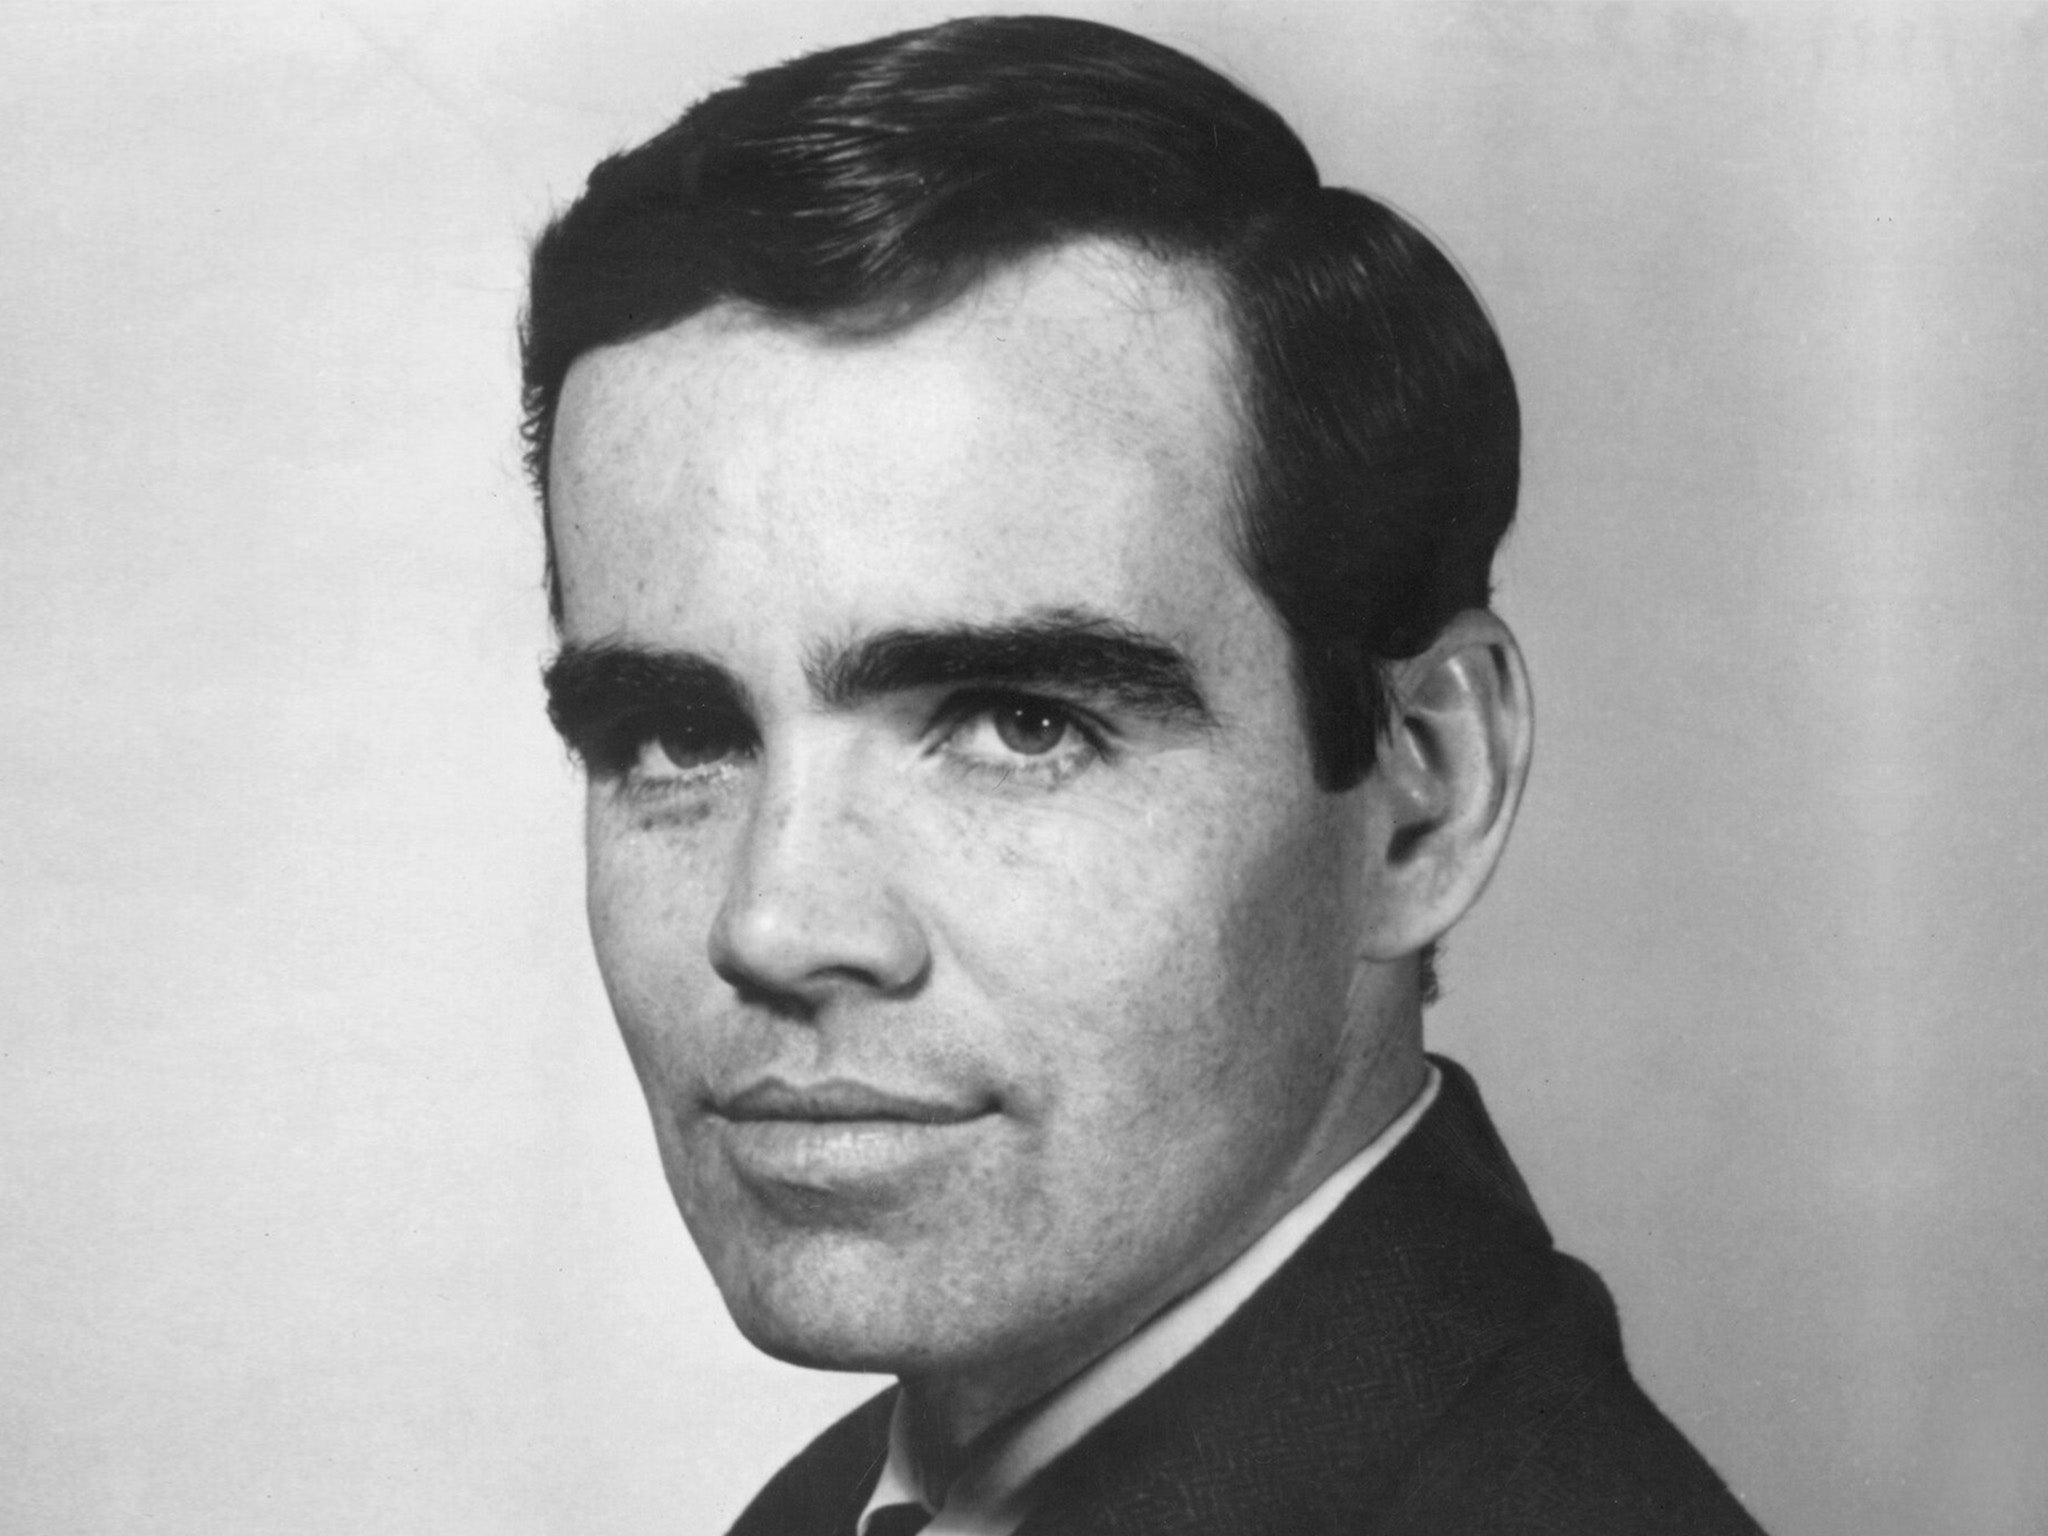 A portrait of Cormac McCarthy from the dust jacket of his debut novel, ‘The Orchard Keeper’, in 1965